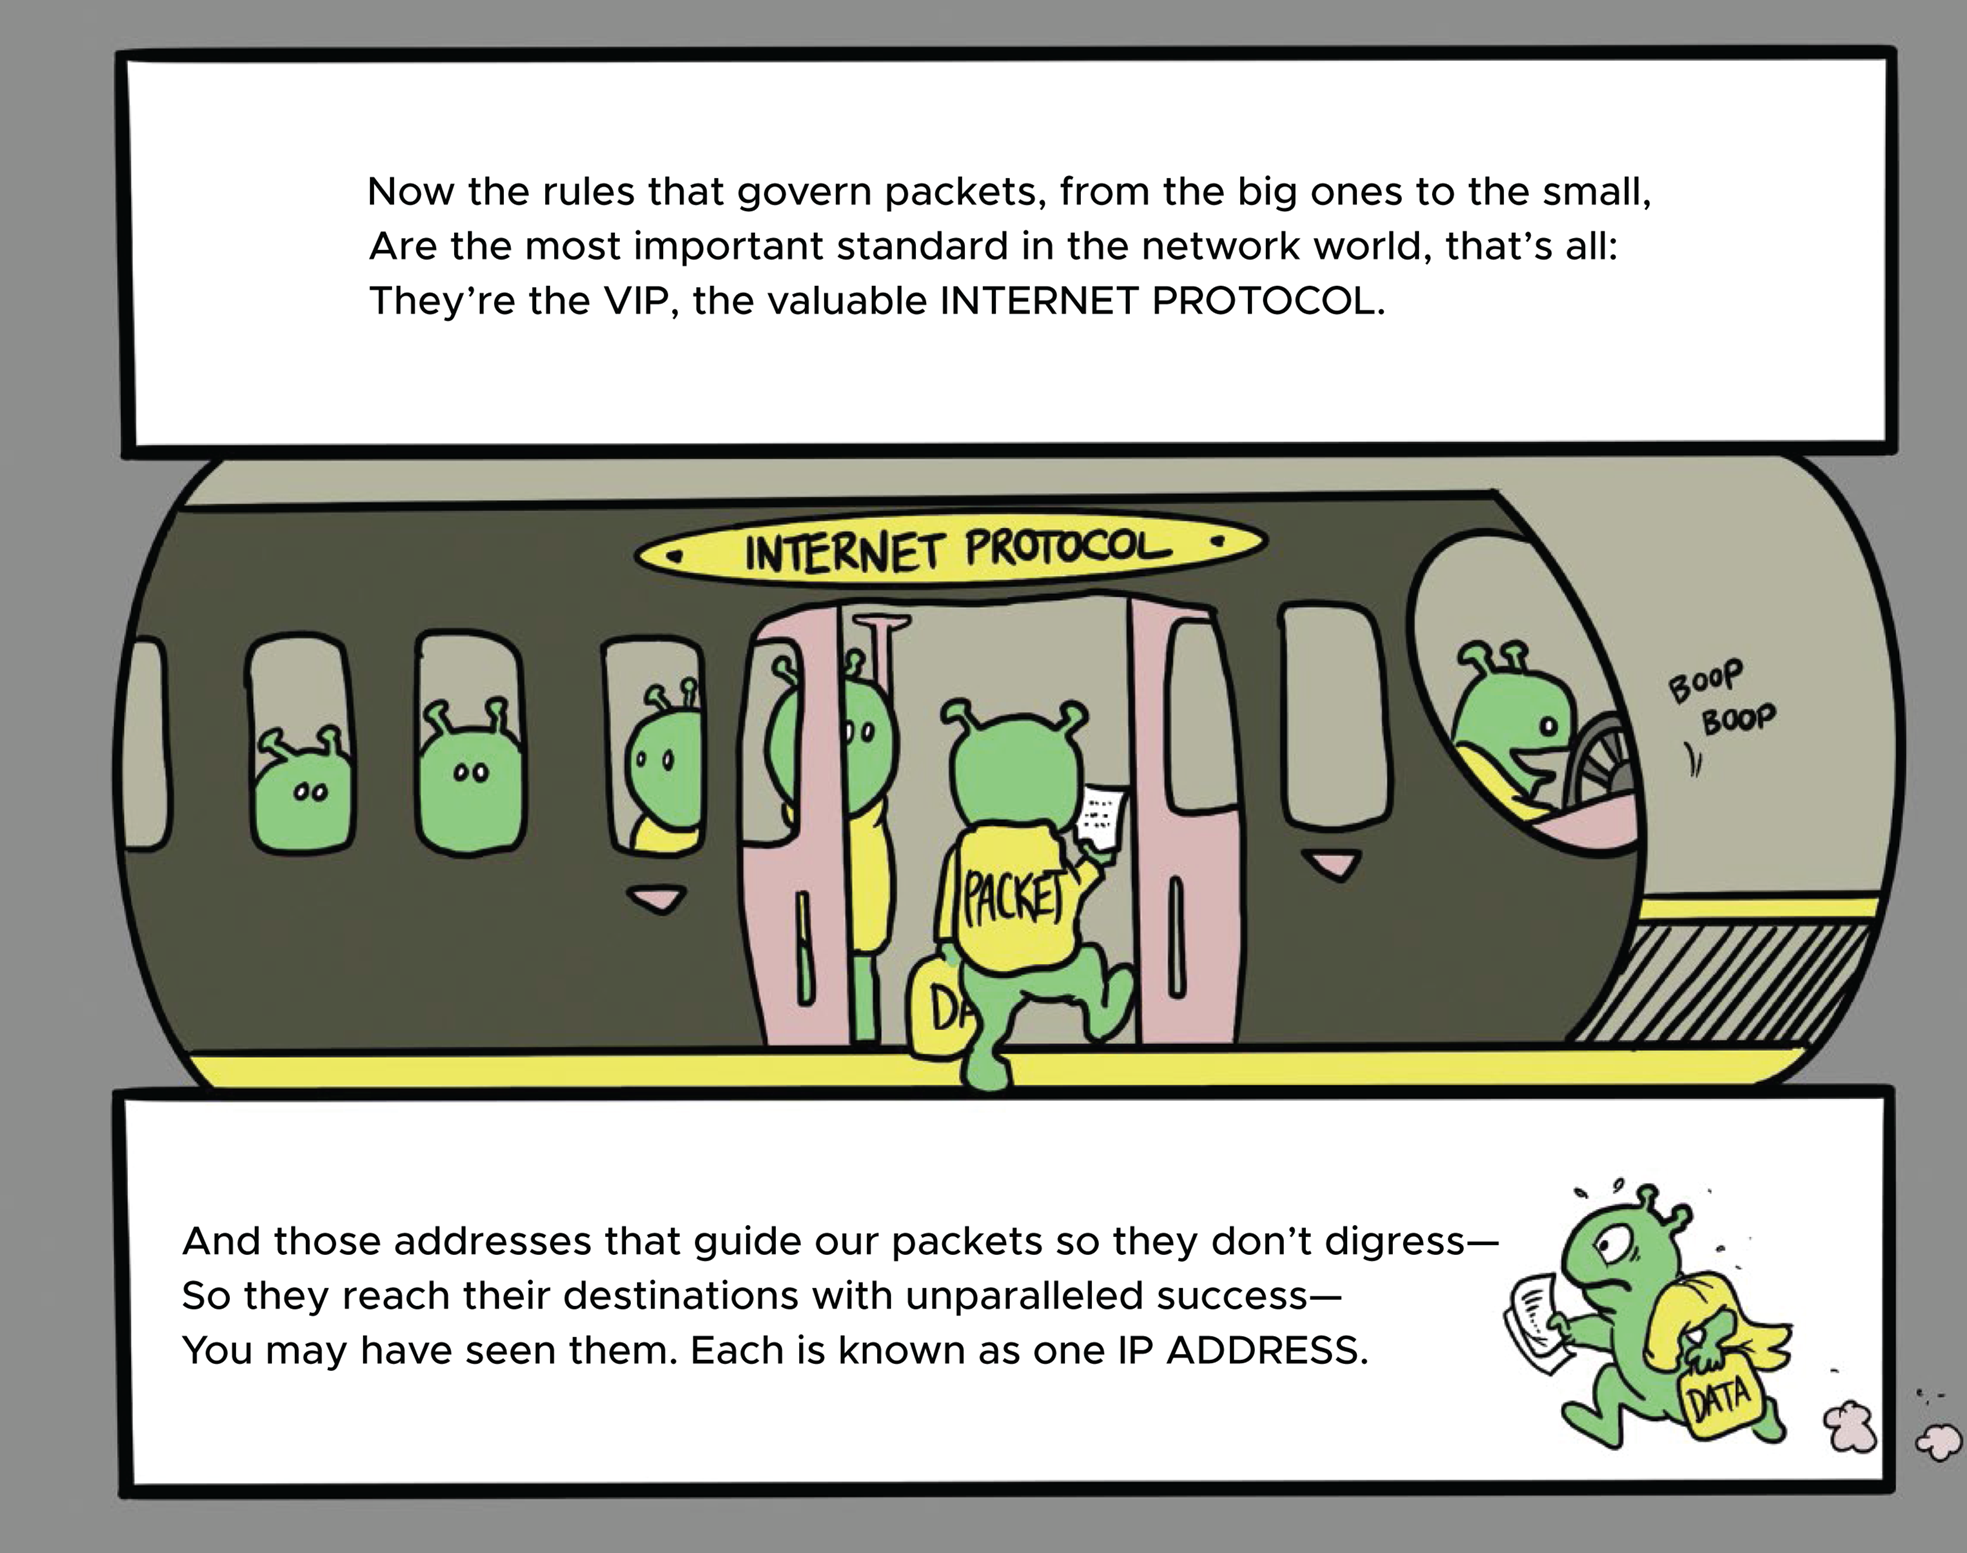 Cartoon illustration of a train that represents internet protocol allowing the packets to get inside.